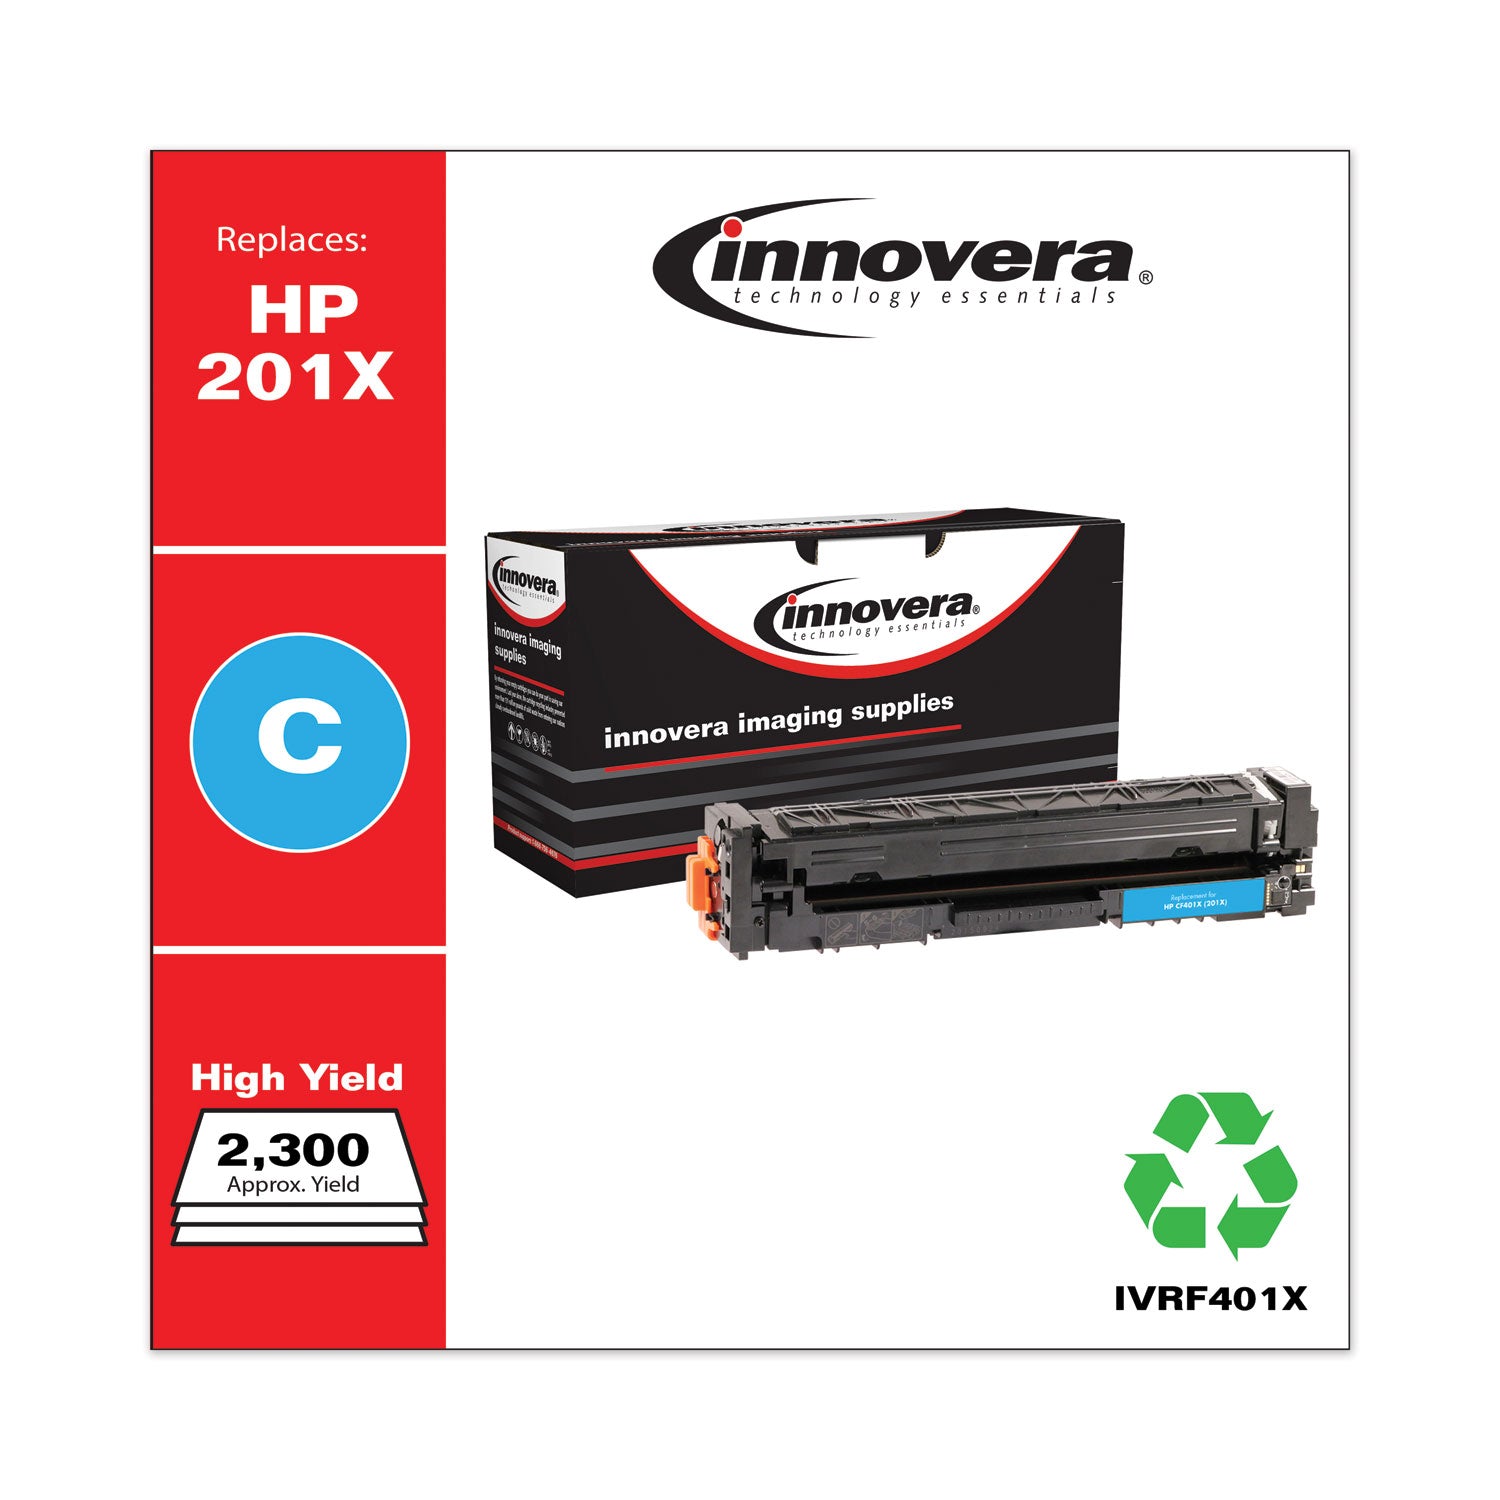 remanufactured-cyan-high-yield-toner-replacement-for-201x-cf401x-2300-page-yield_ivrf401x - 2